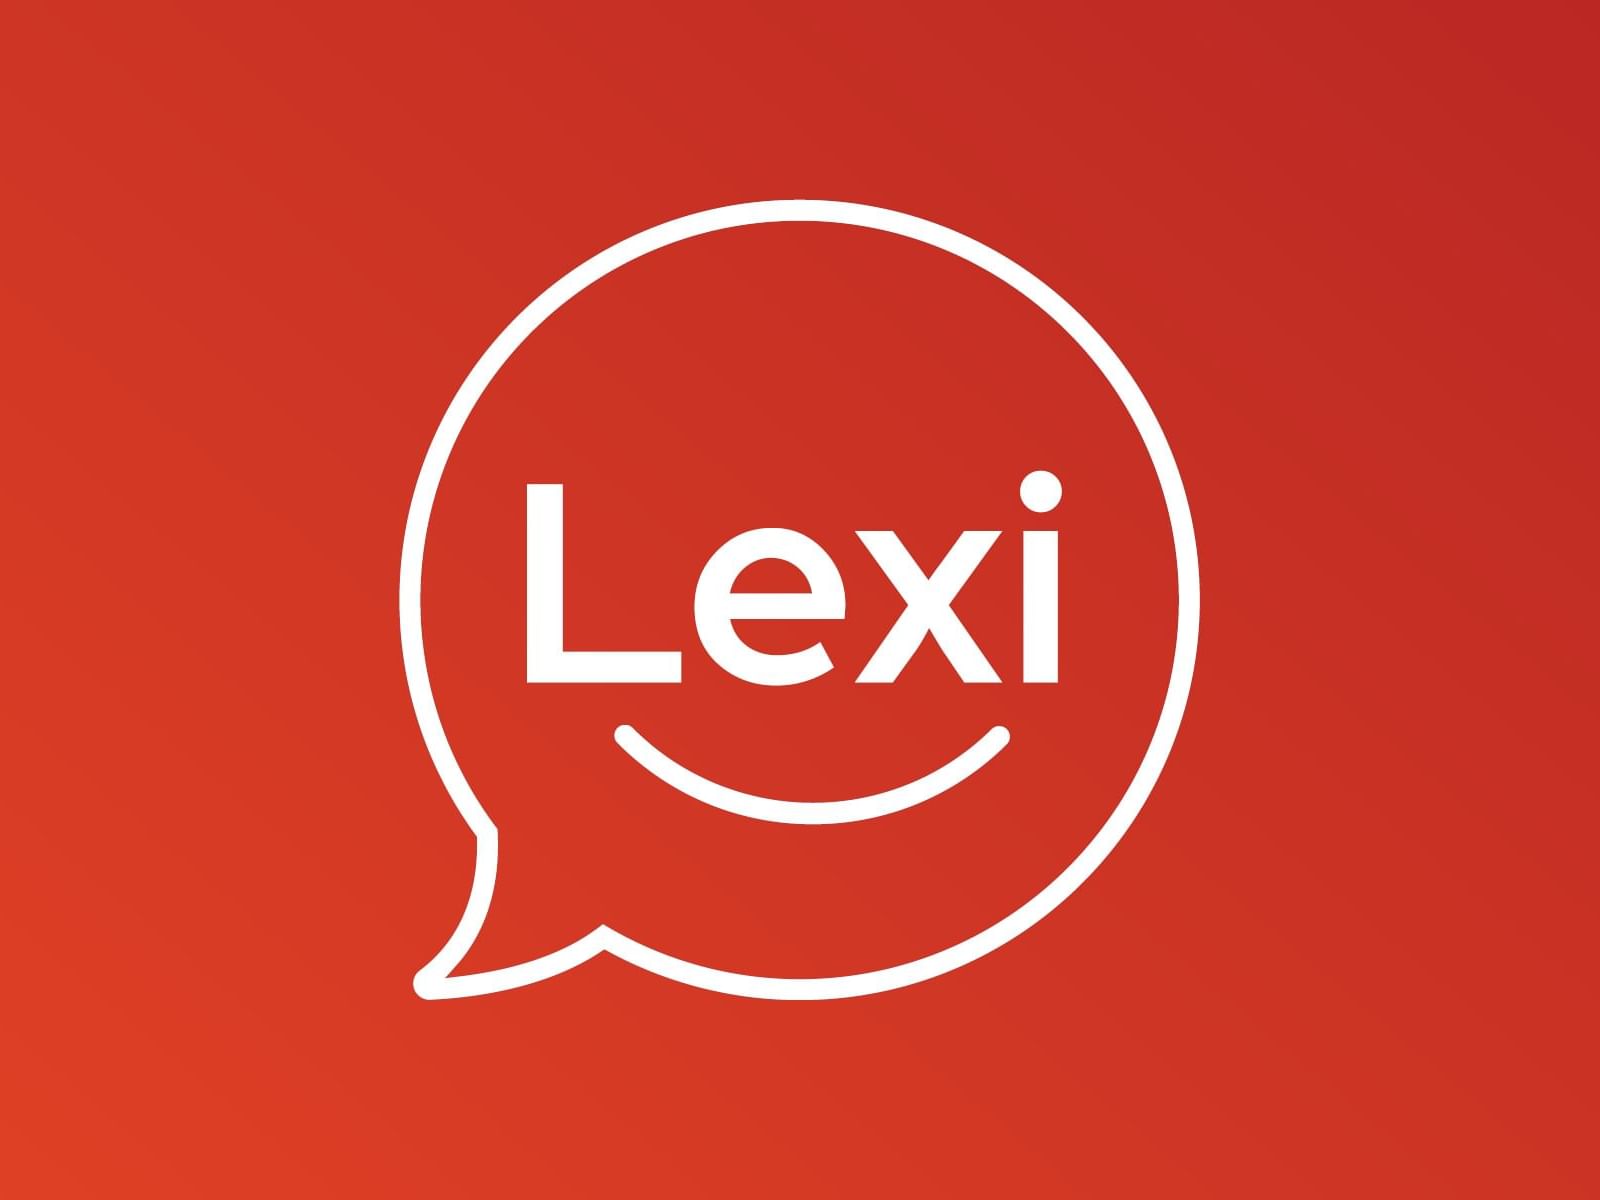 Web logo of Lexi in a red background used at Fiesta Inn